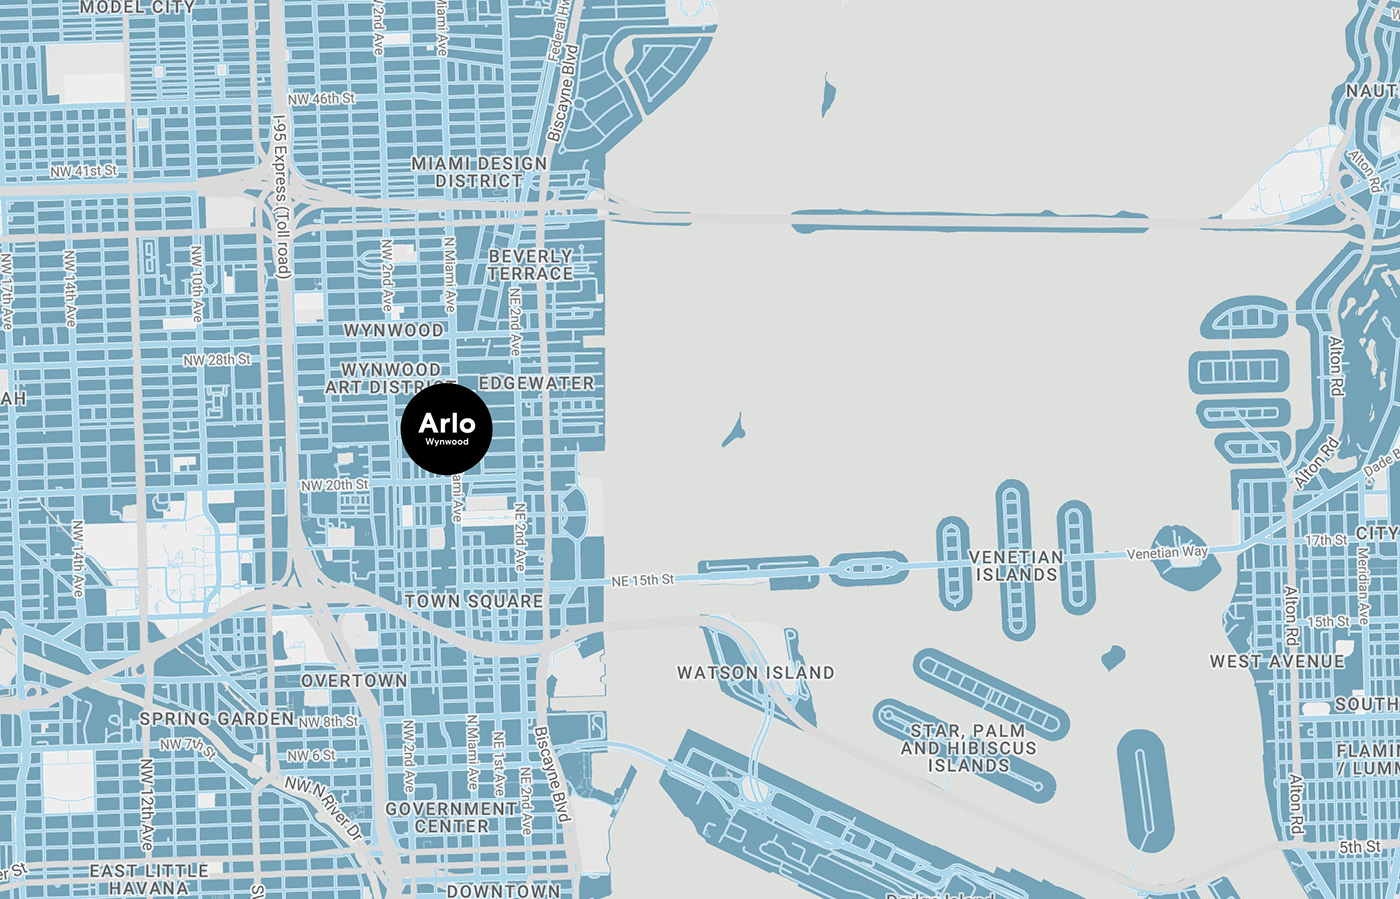 Stylized map highlighting the location of "Arlo Wynwood" in a neighborhood of Miami, showing surrounding areas including Wynwood Art District, Miami Design District, and Venetian Islands.